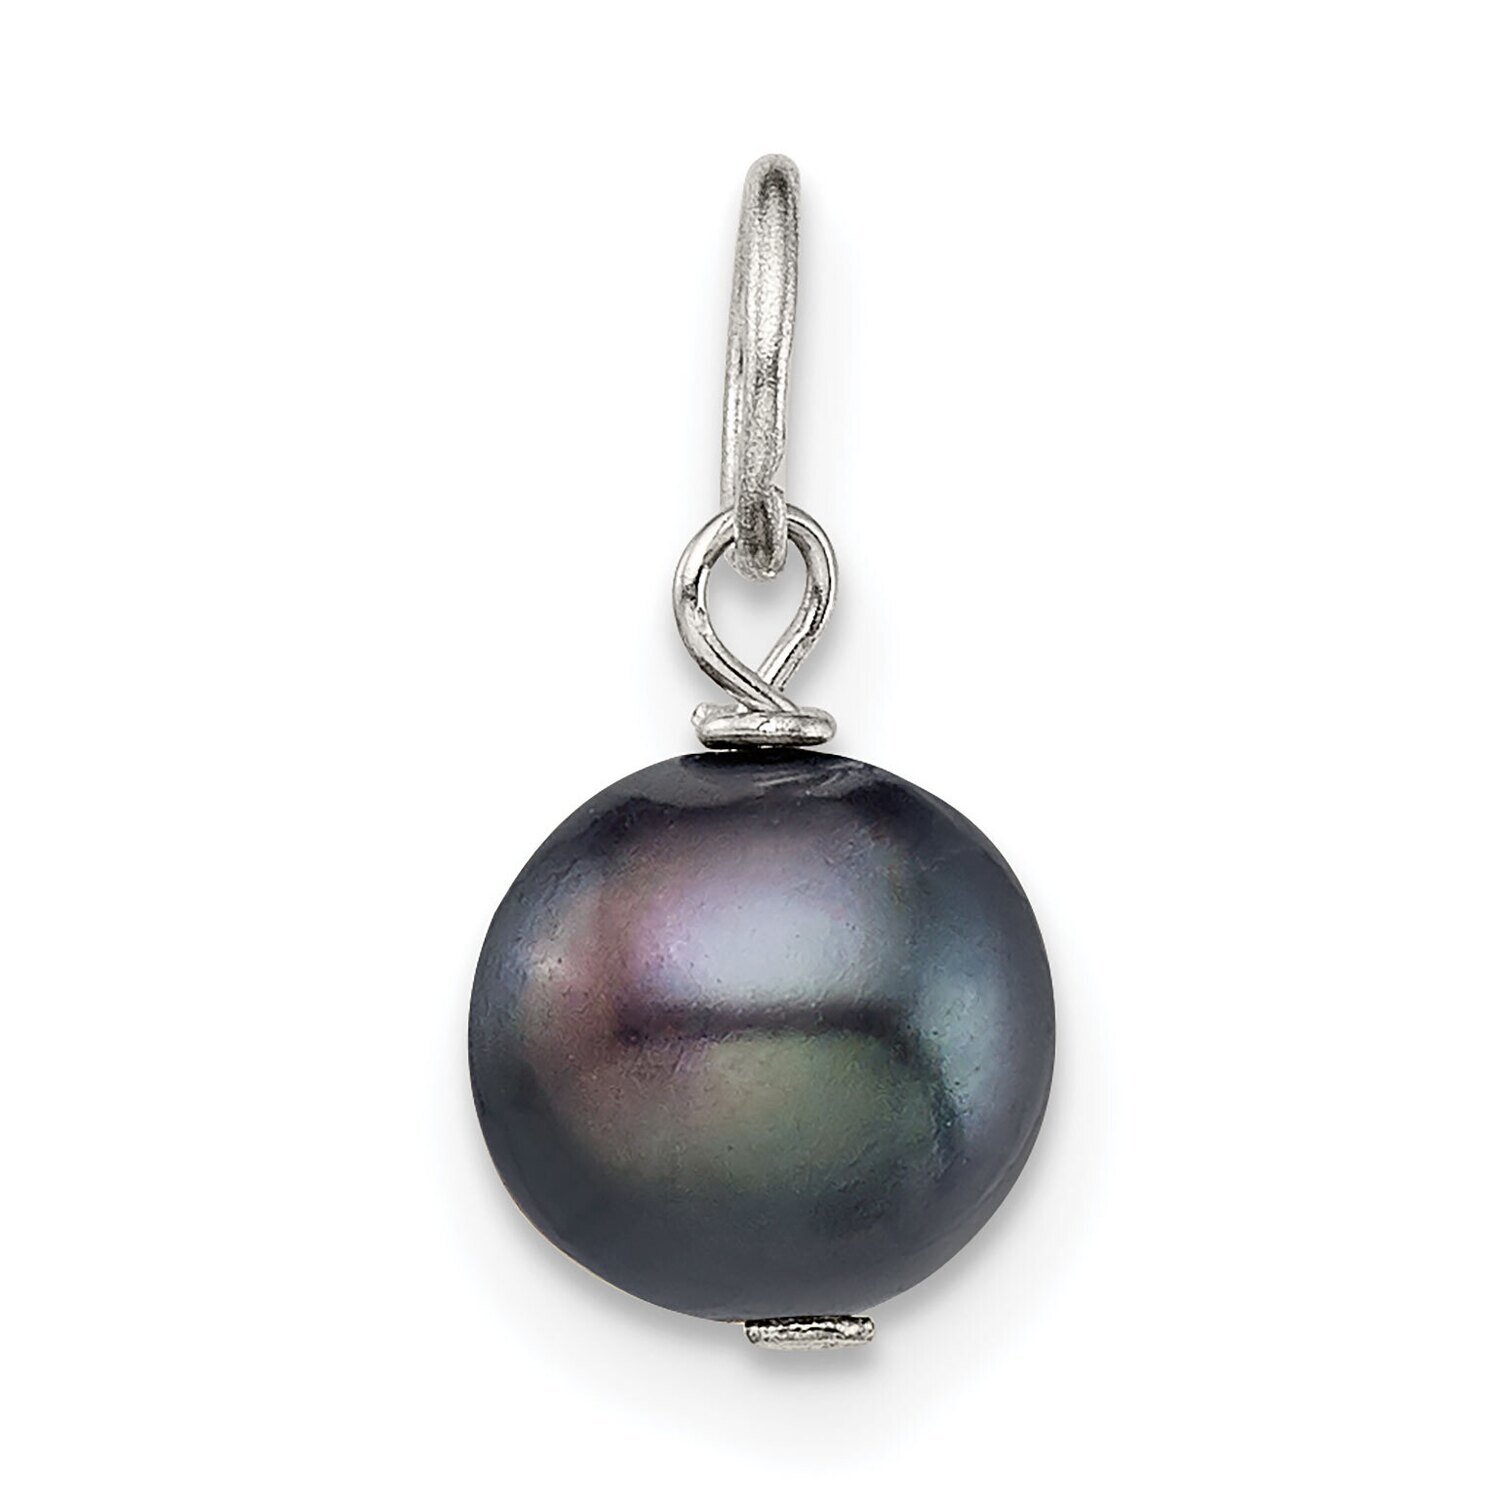 7mm Black Freshwater Cultured Pearl Charm Sterling Silver SS4963B